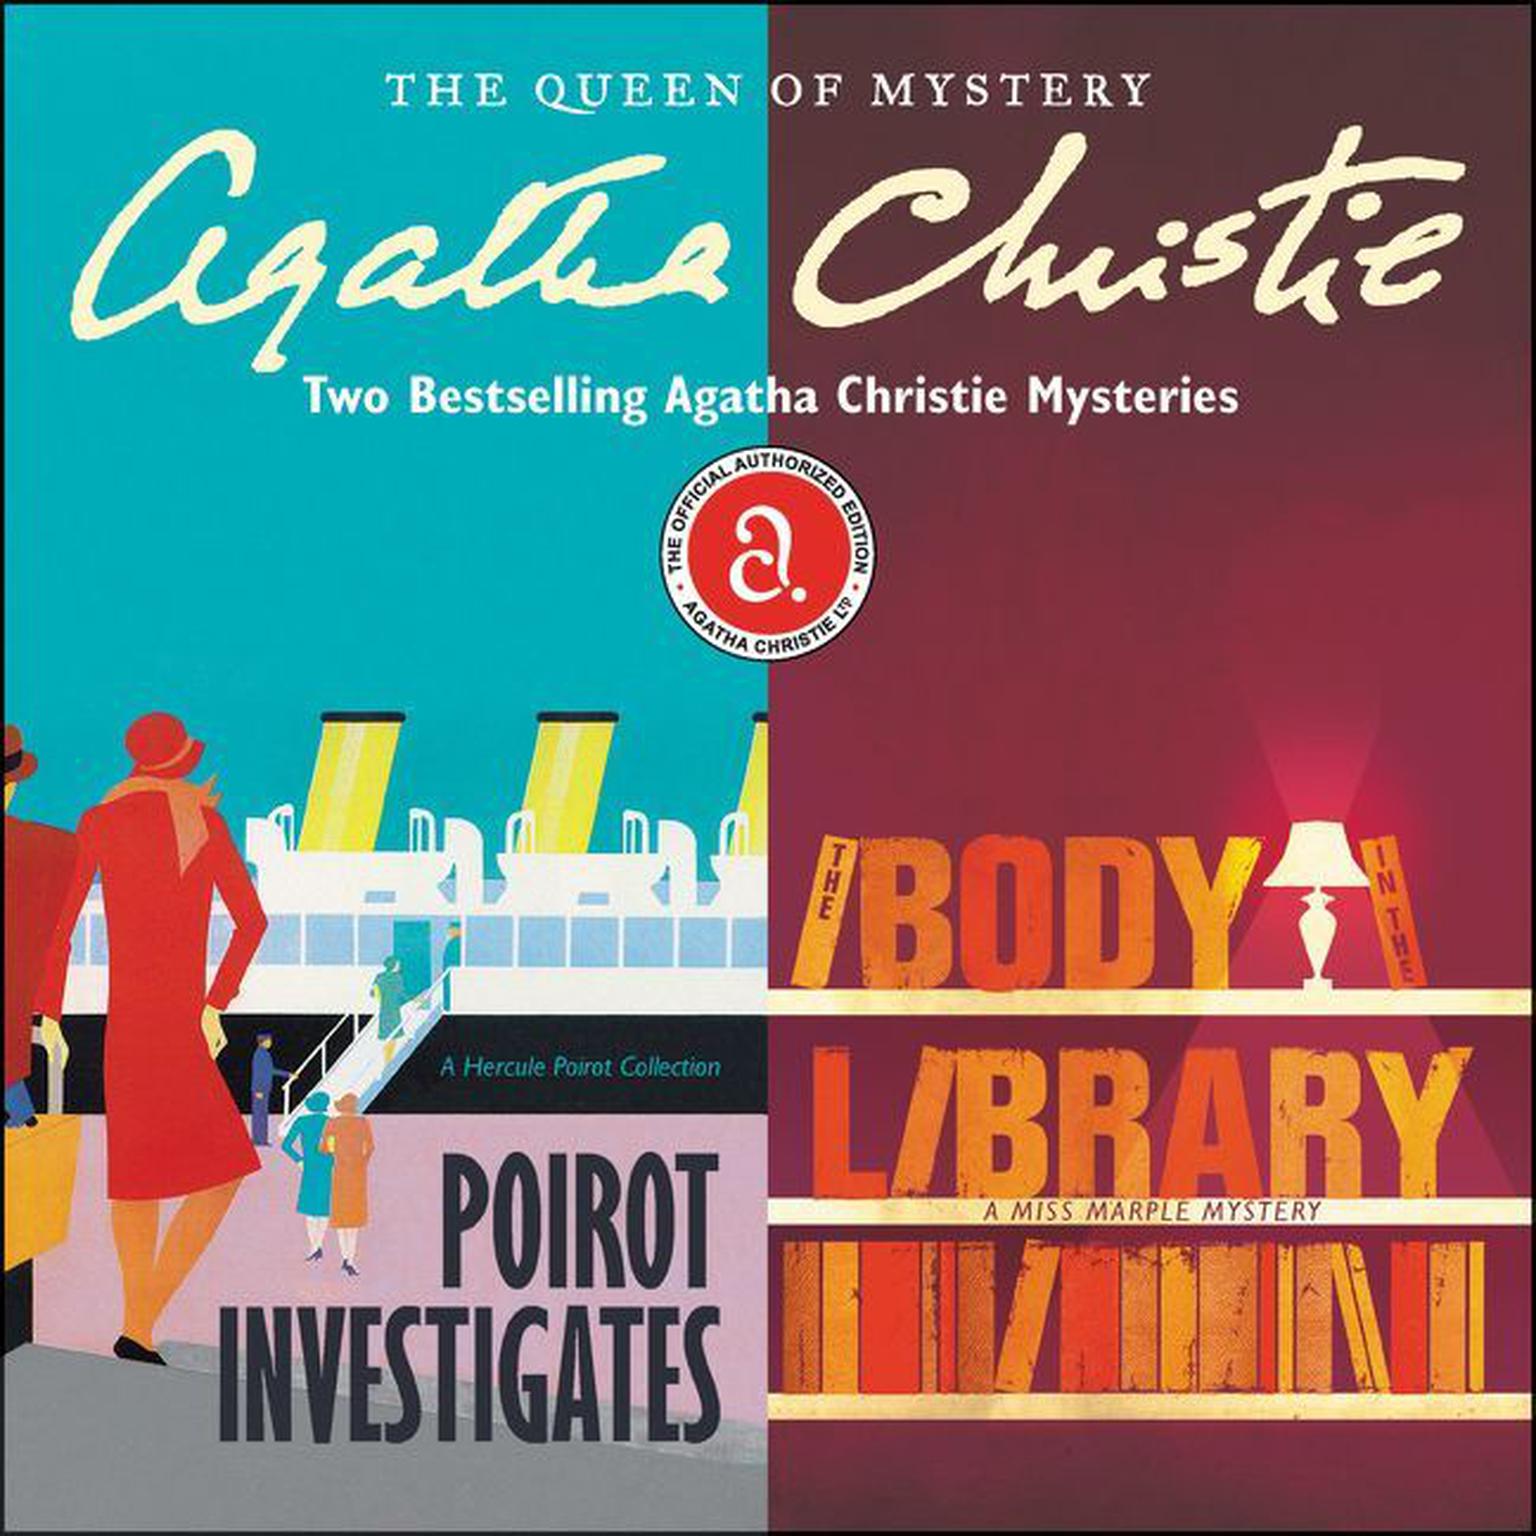 Poirot Investigates & The Body in the Library: Two Bestselling Agatha Christie Novels in One Great Audiobook Audiobook, by Agatha Christie